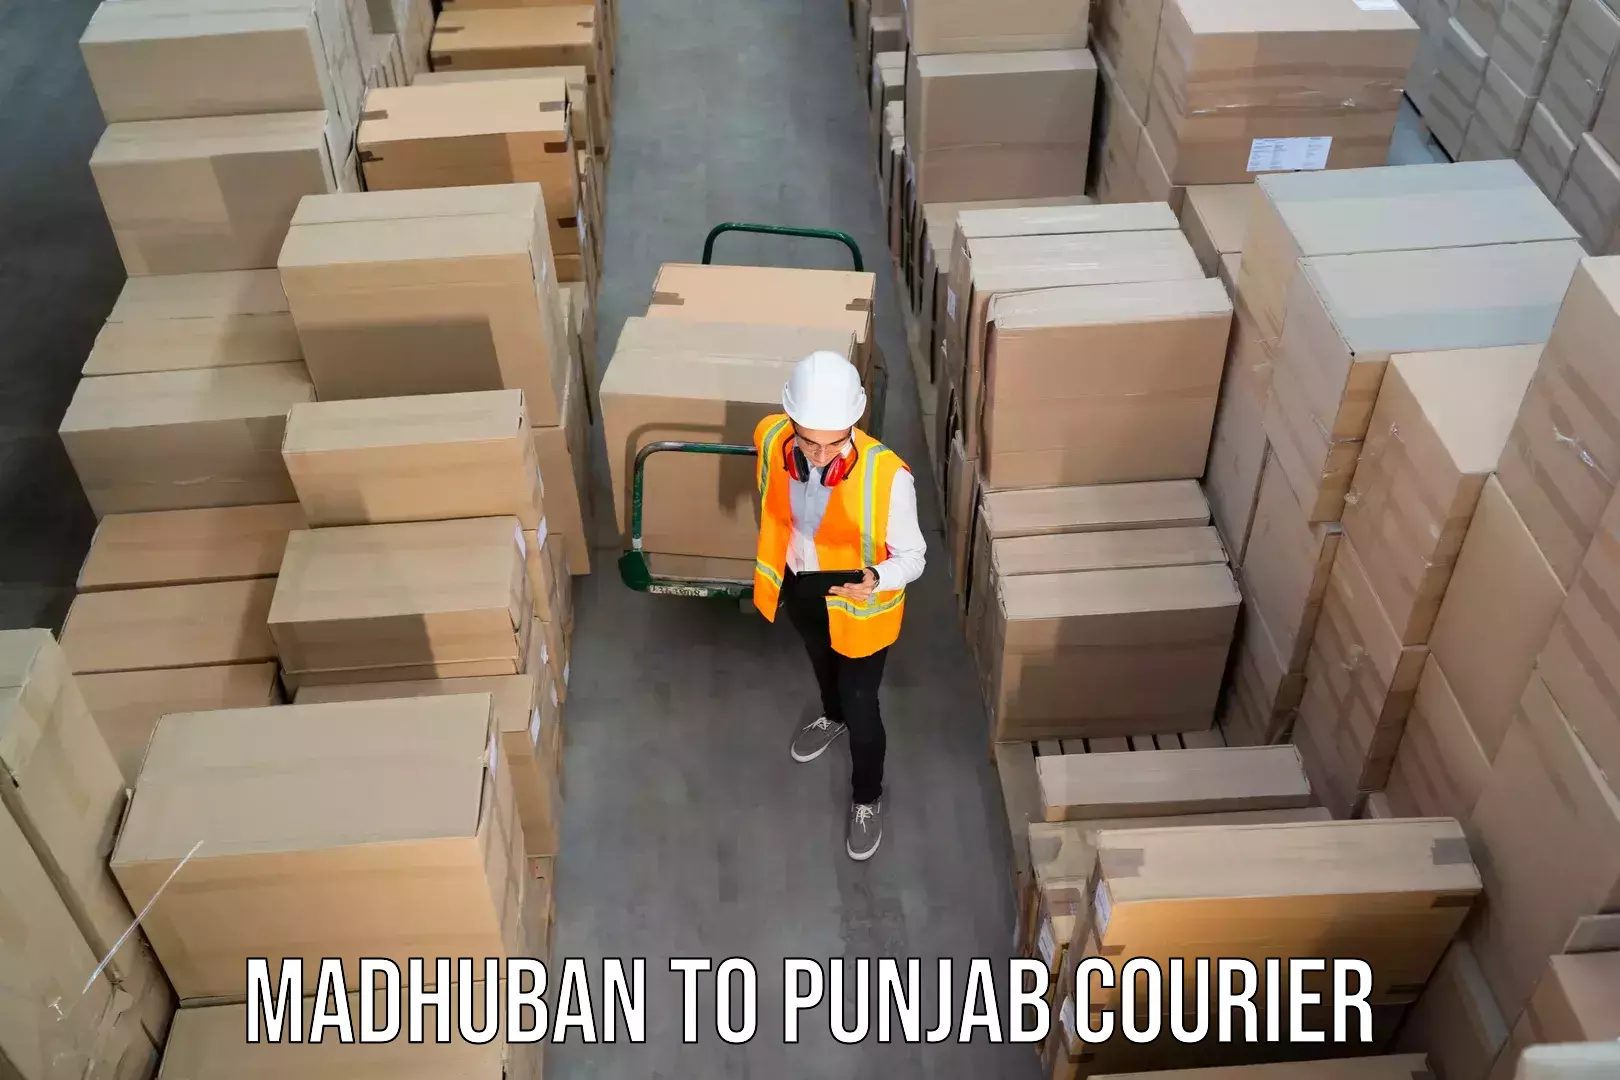 User-friendly delivery service Madhuban to Punjab